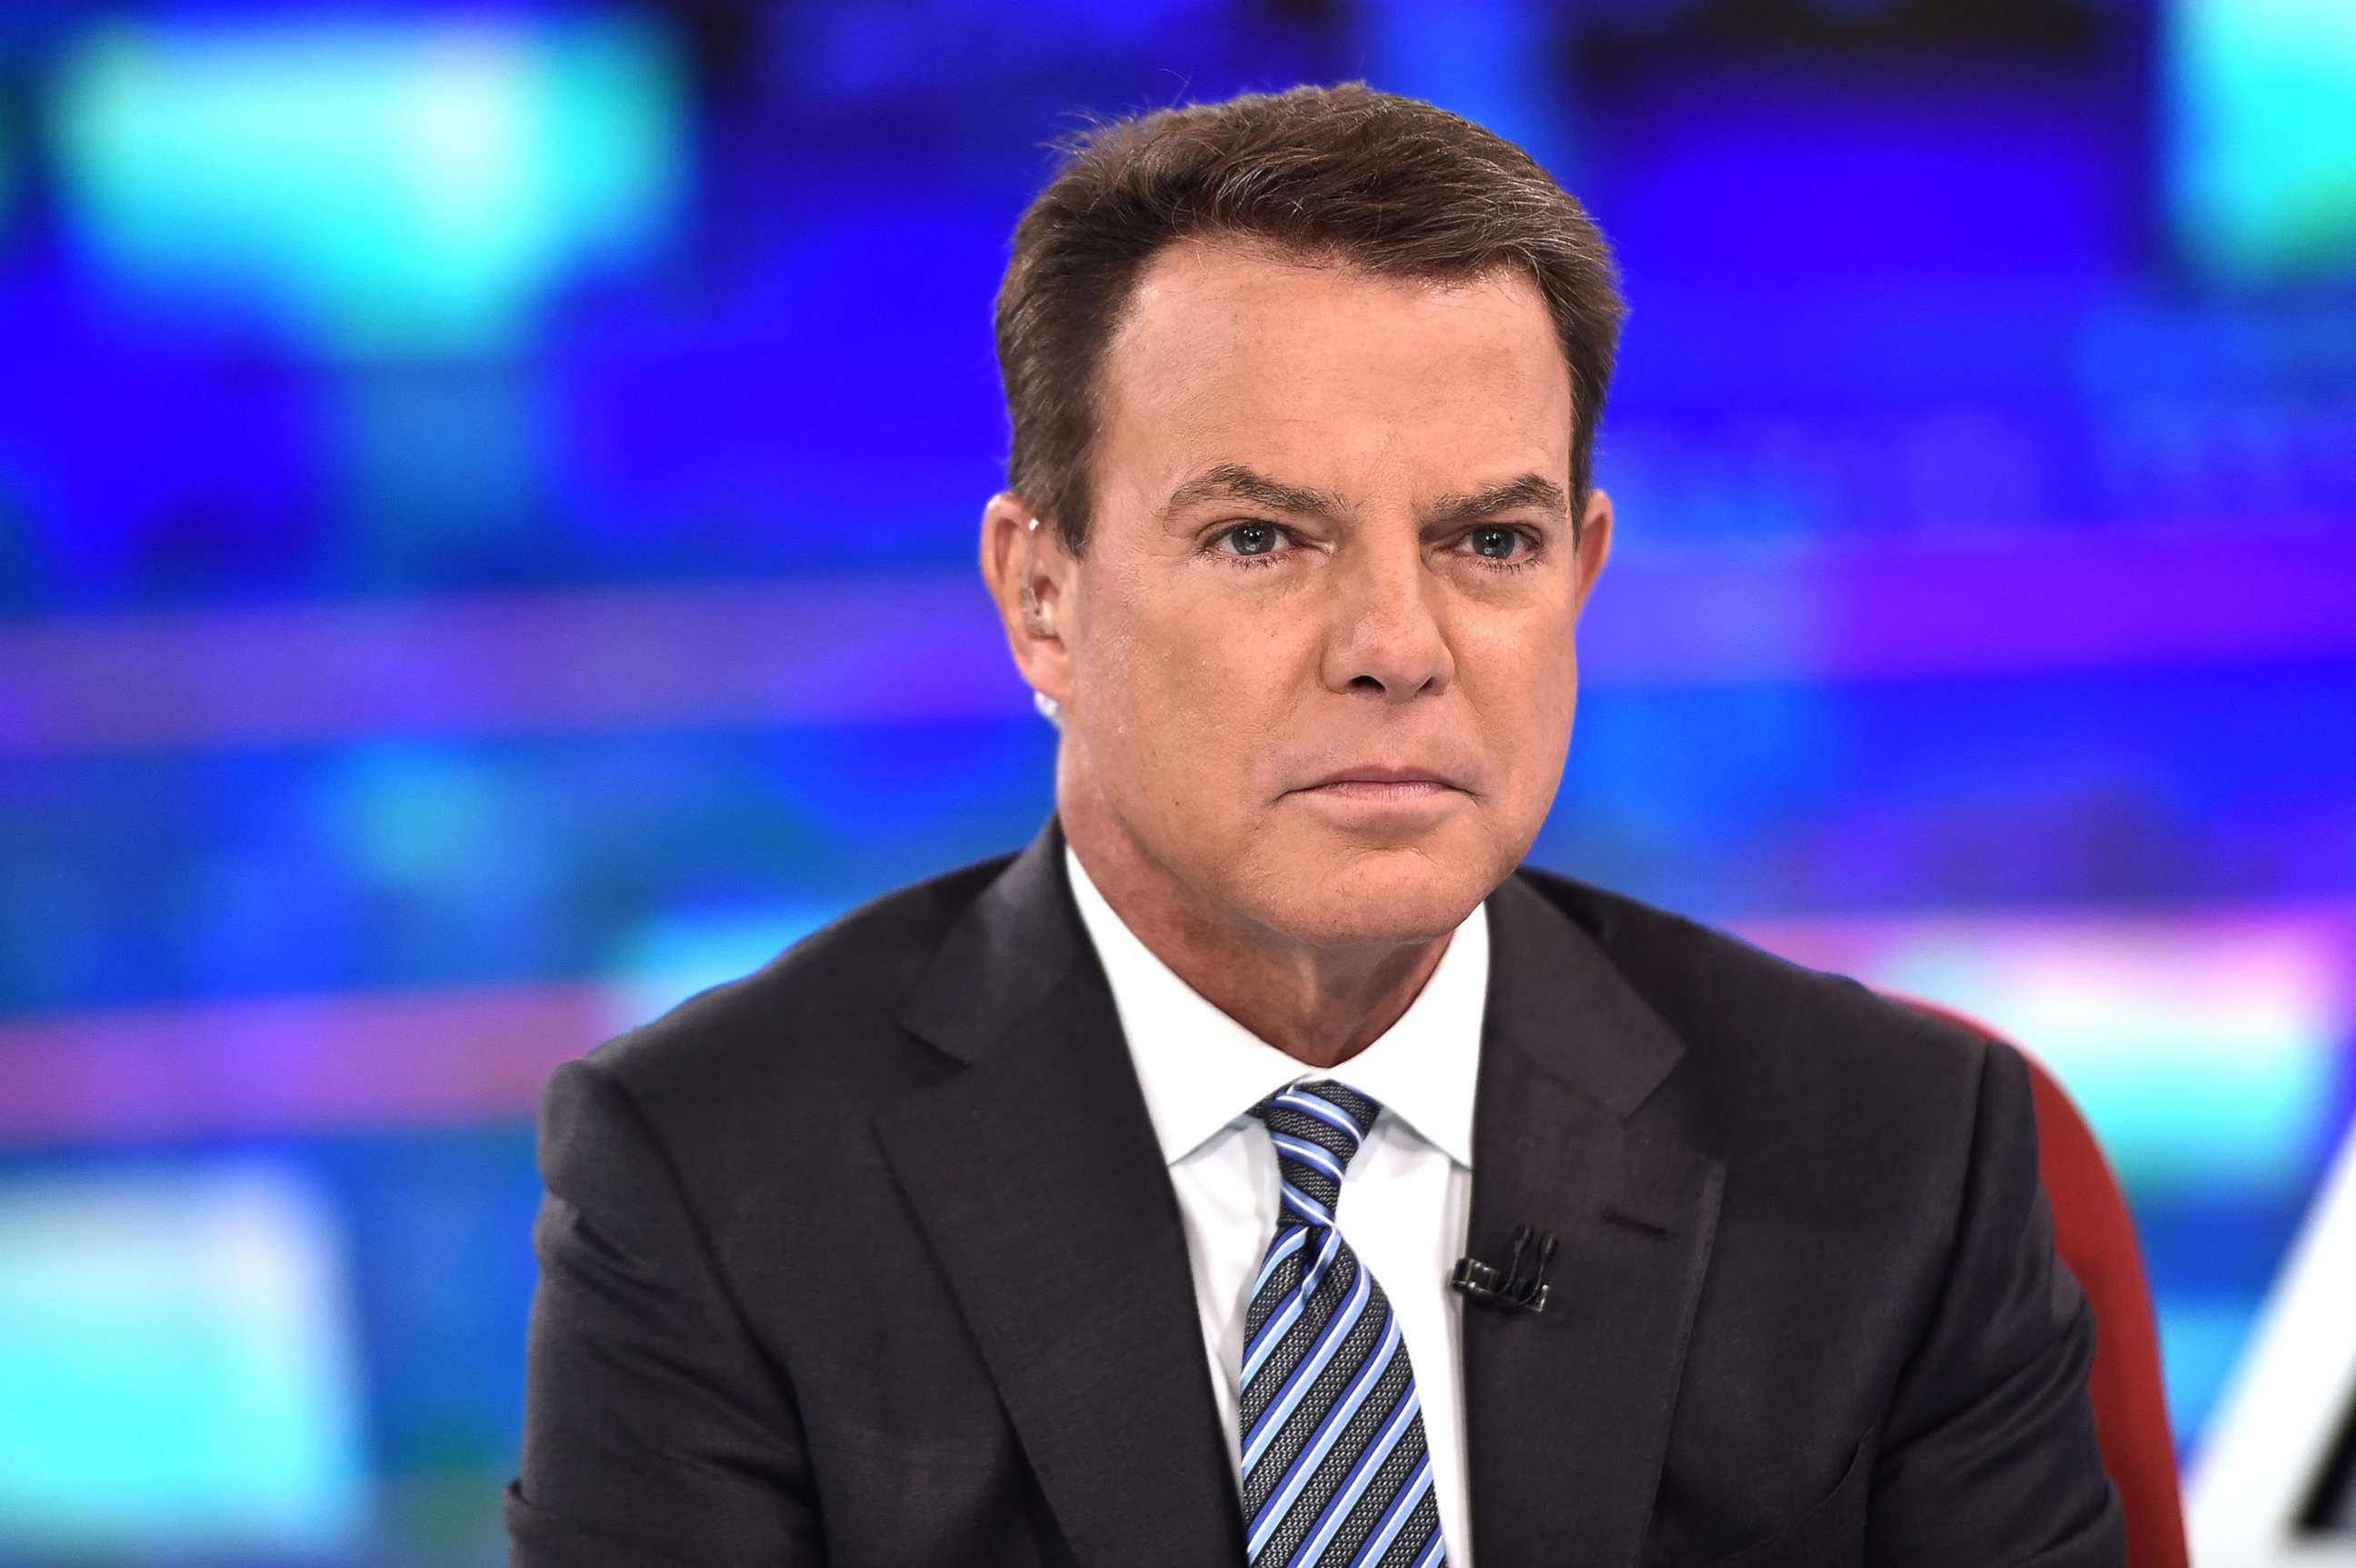 PHOTO: In this Sept. 17, 2019, file photo, Shepard Smith is shown on the set of "Shepard Smith Reporting" at Fox News Channel Studios in New York.